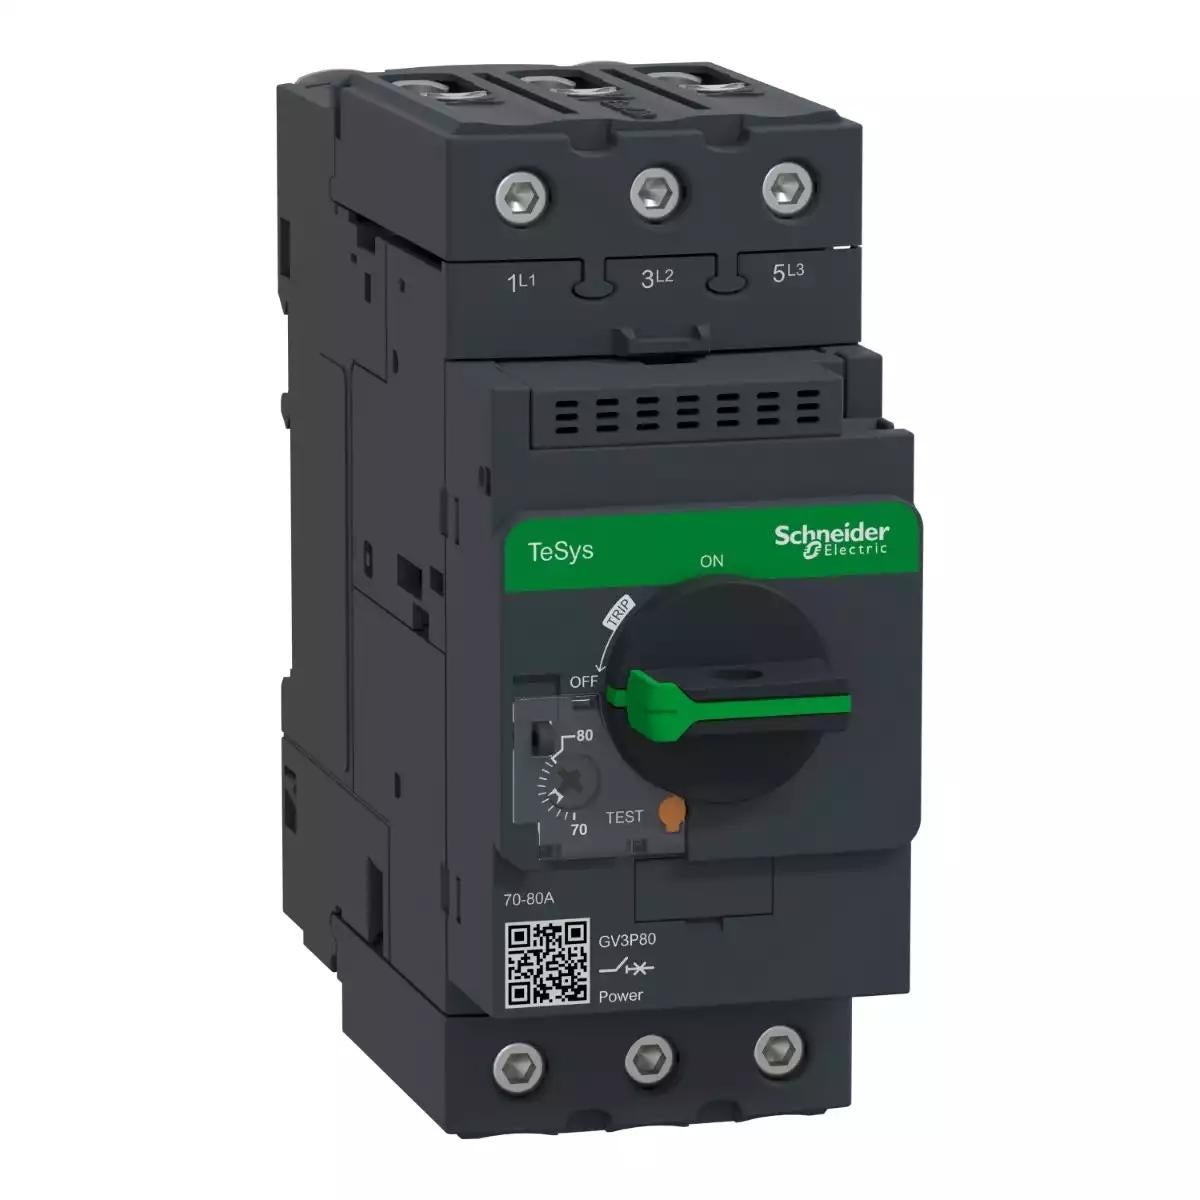 TeSys Deca frame 3, Motor Circuit Breaker, 3P, 70-80A, Thermal Magnetic, EverLink Terminals